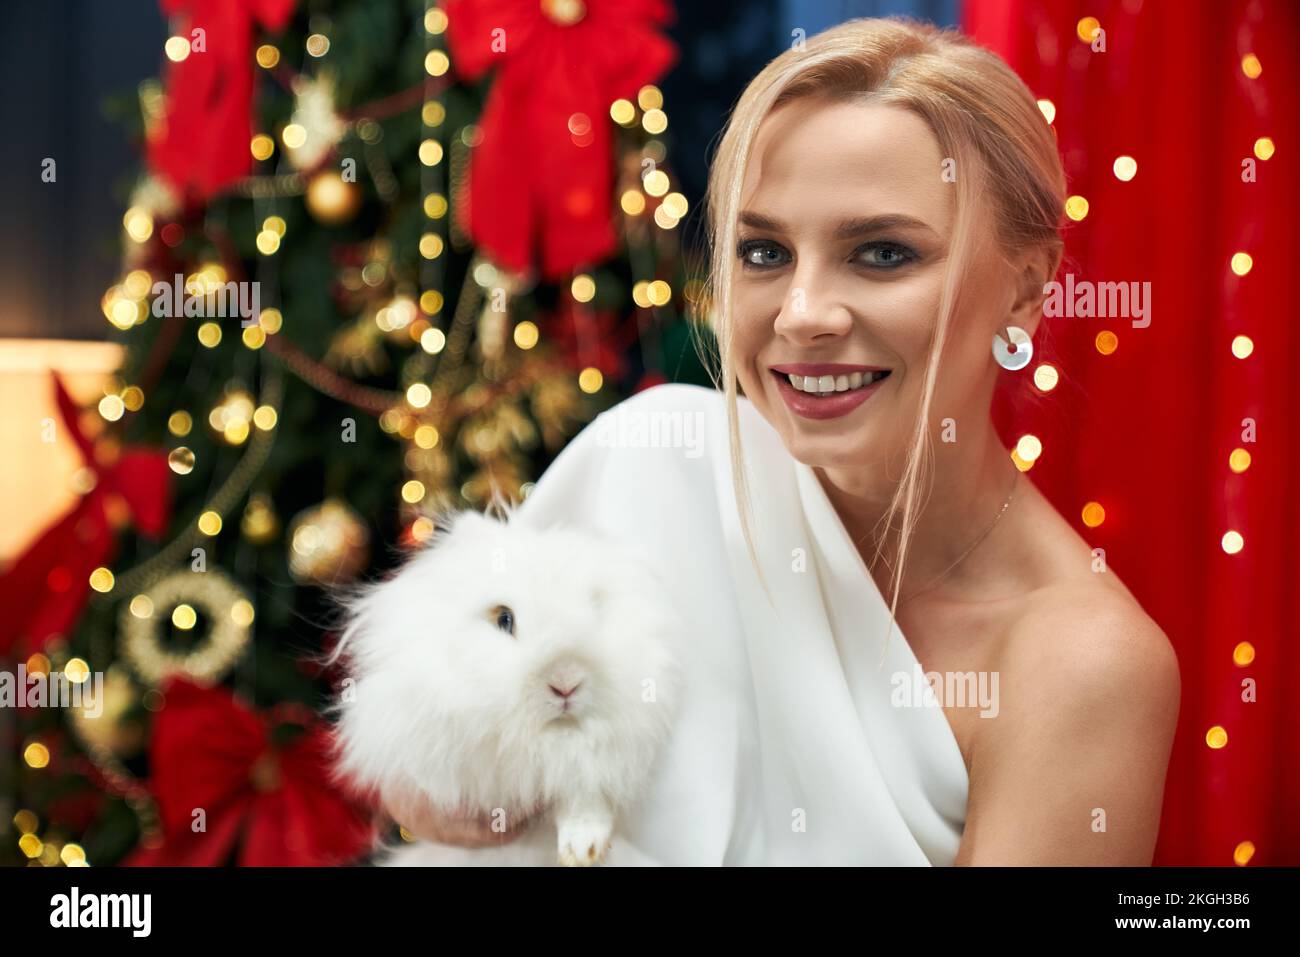 Front view of cheerful, happy lady holding white, furry rabbit. Beautiful, blonde woman wearing white dress, looking at camera, smiling. Concept of ho Stock Photo